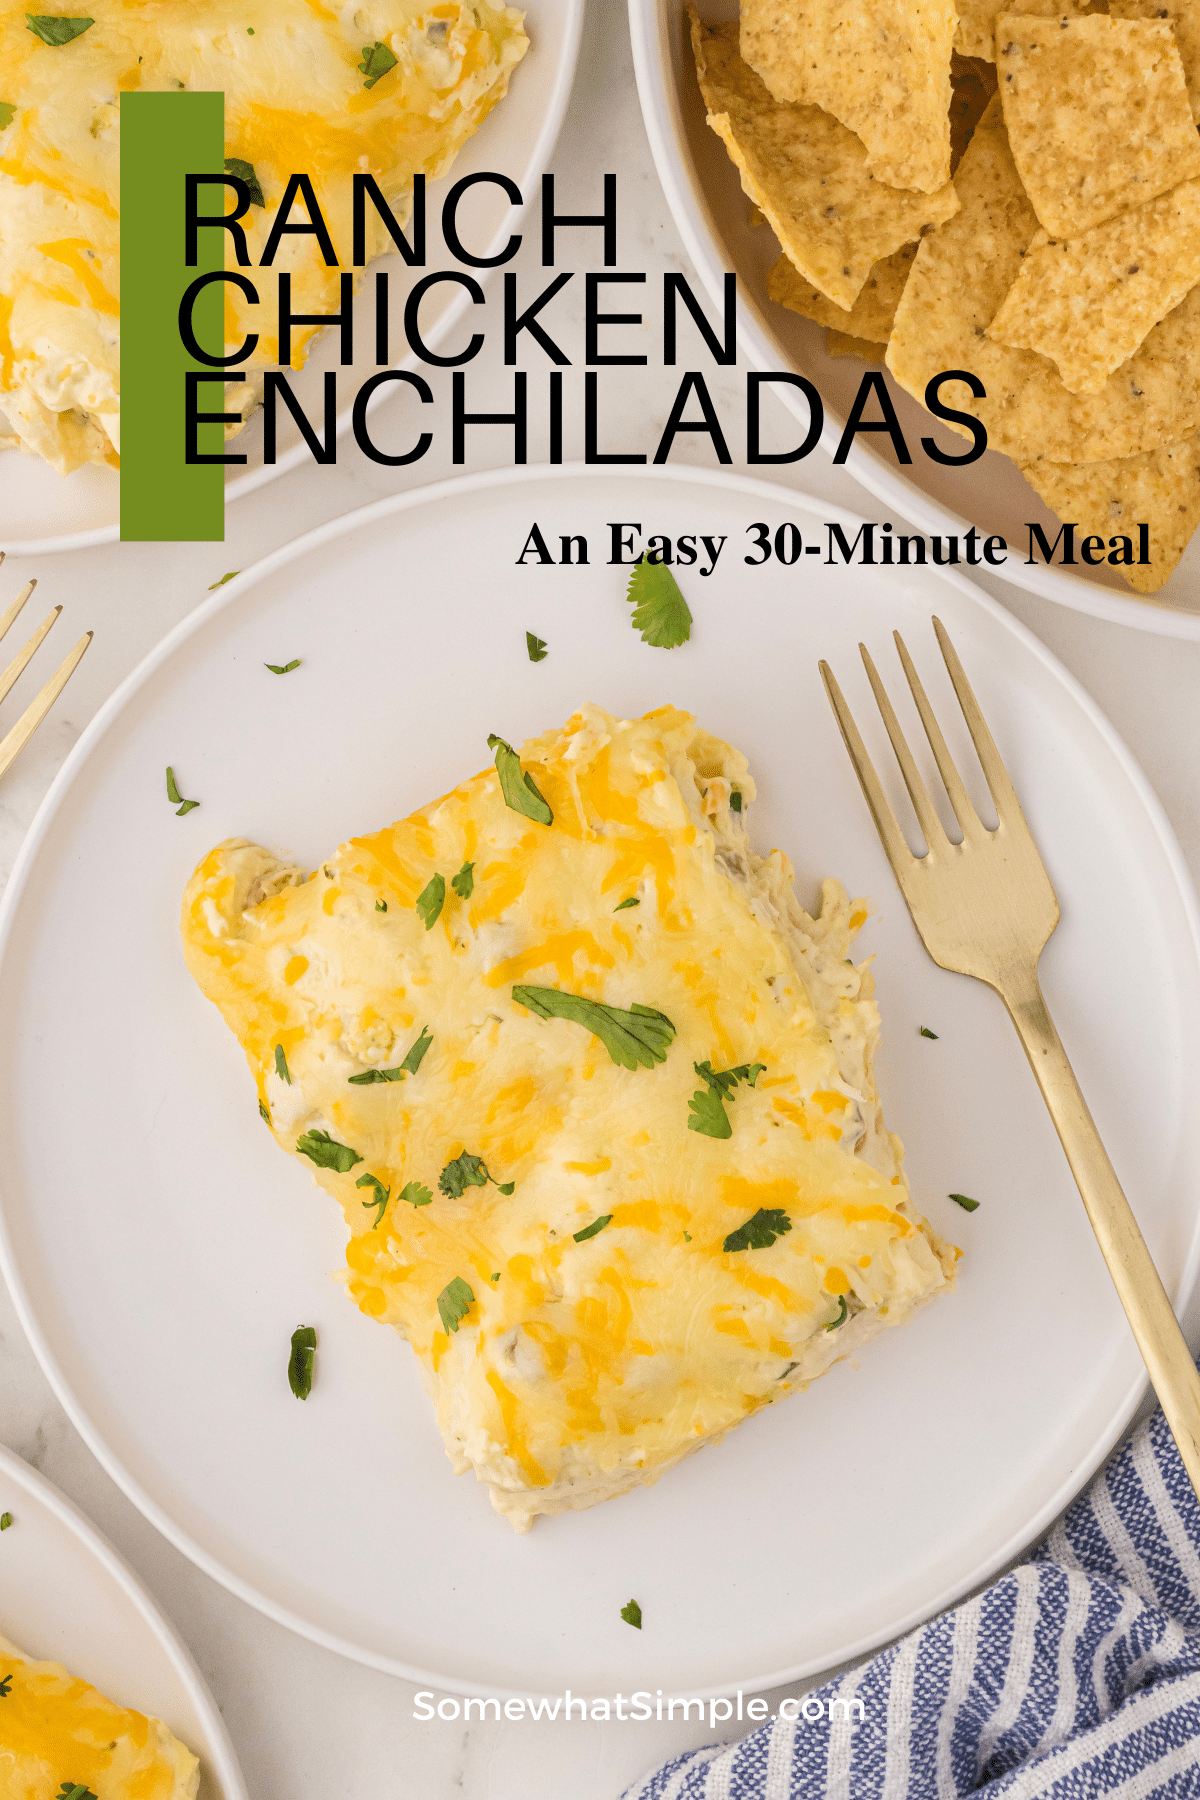 Ranch Chicken Enchiladas is a a 30-minute meal made with shredded chicken, a creamy ranch sauce, warm tortillas and melted cheese. via @somewhatsimple